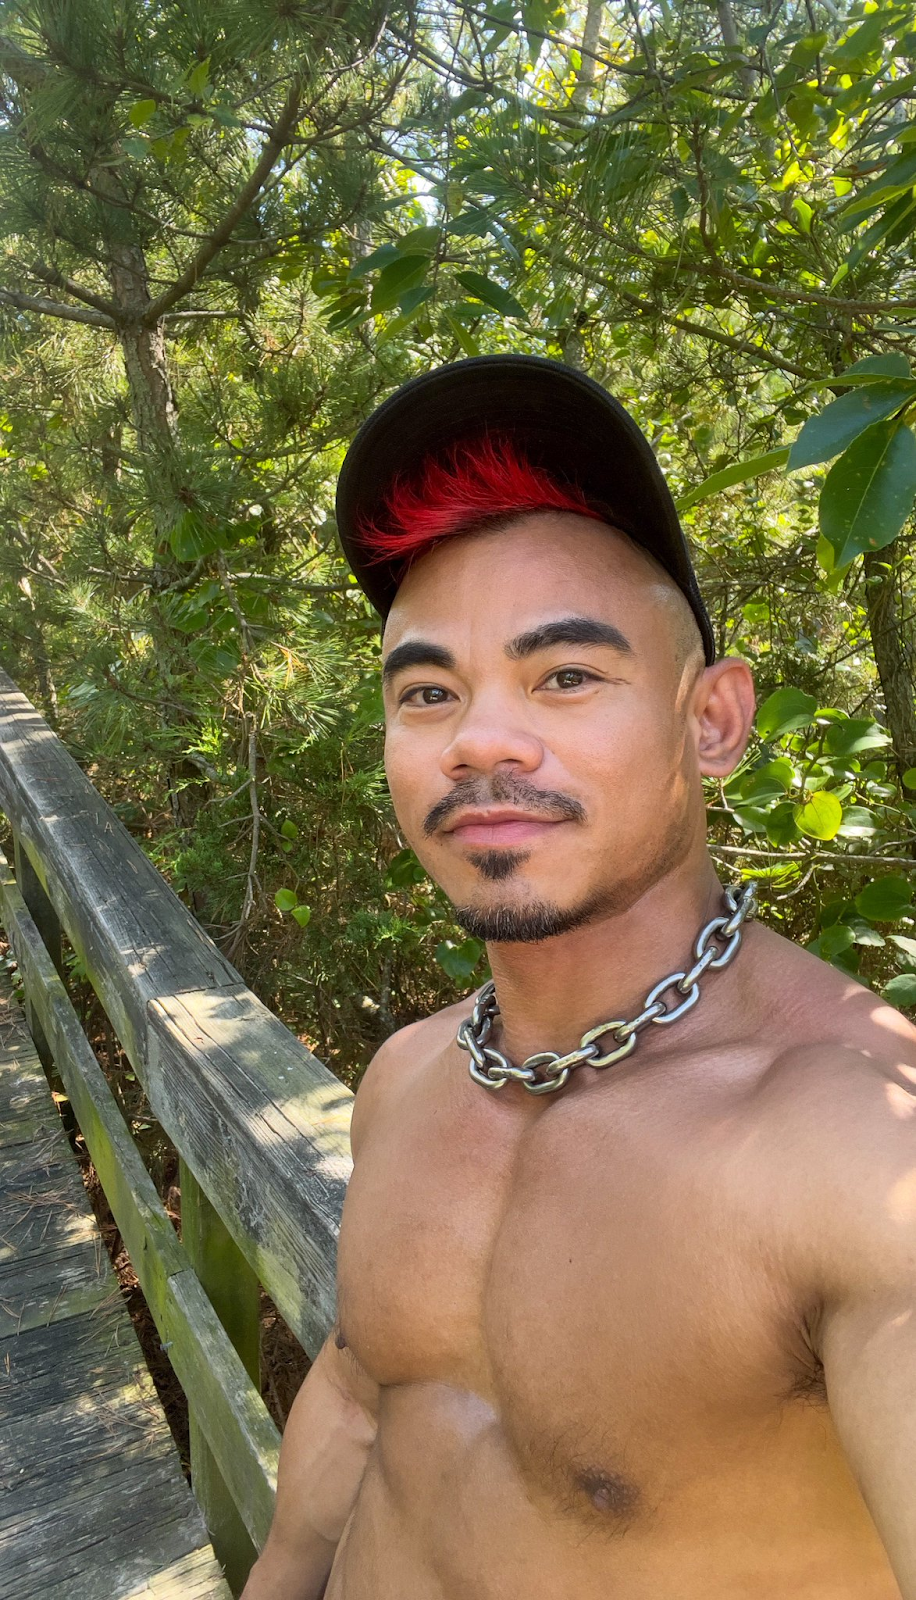 gay xxx porn actor Jason Luna gay cruising at outdoor gay cruising parks shirtless wearing heavy chain necklace and black baseball hat smiling while taking a selfie